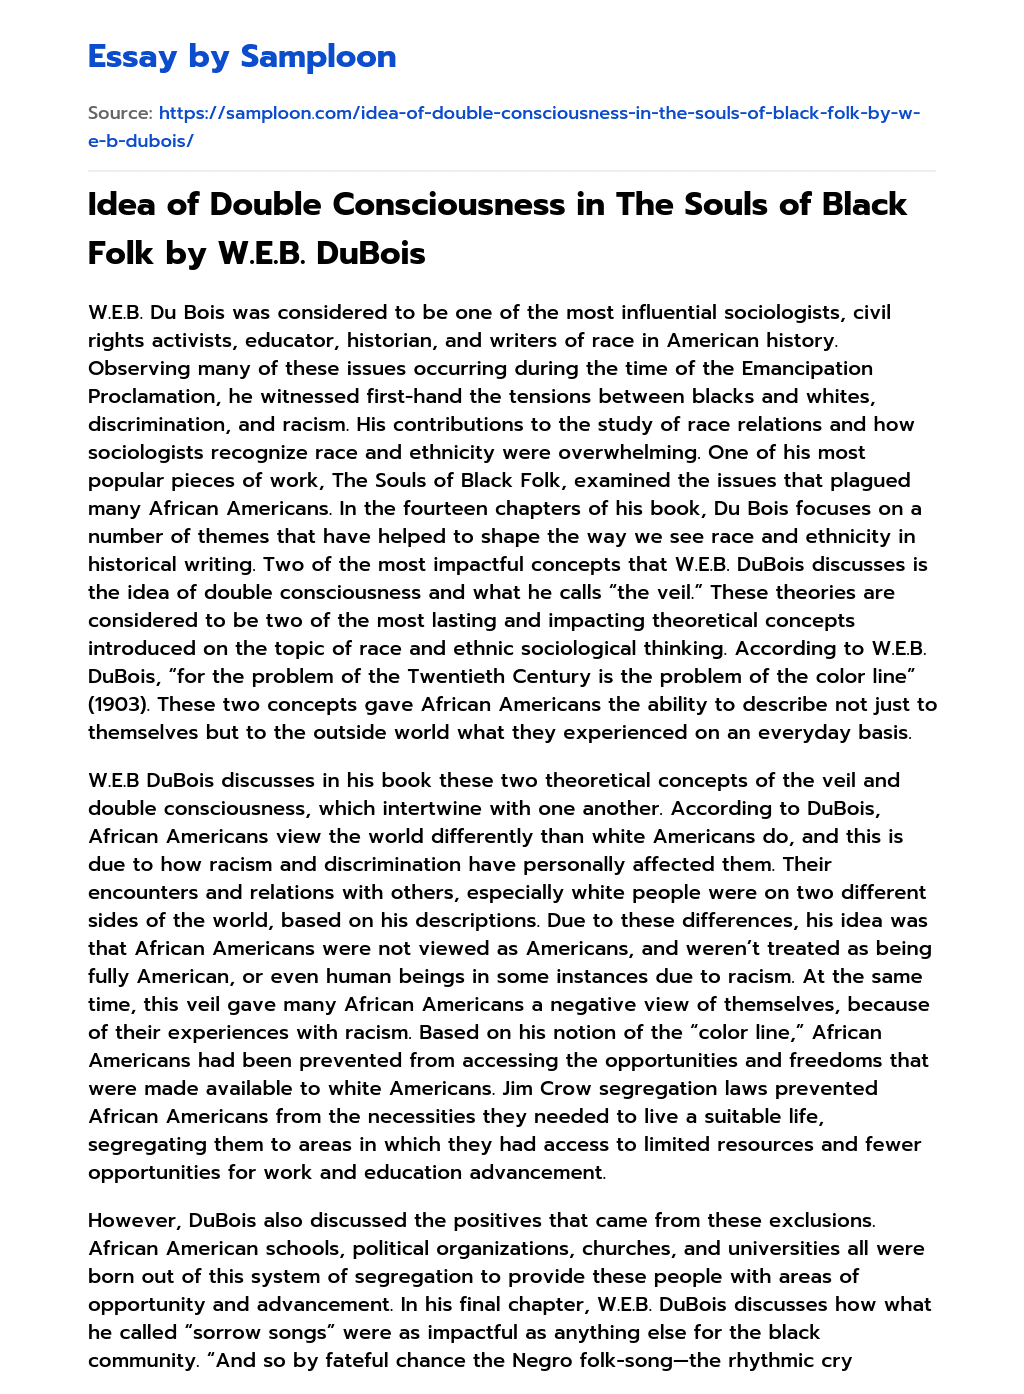 Idea of Double Consciousness in The Souls of Black Folk by W.E.B. DuBois essay